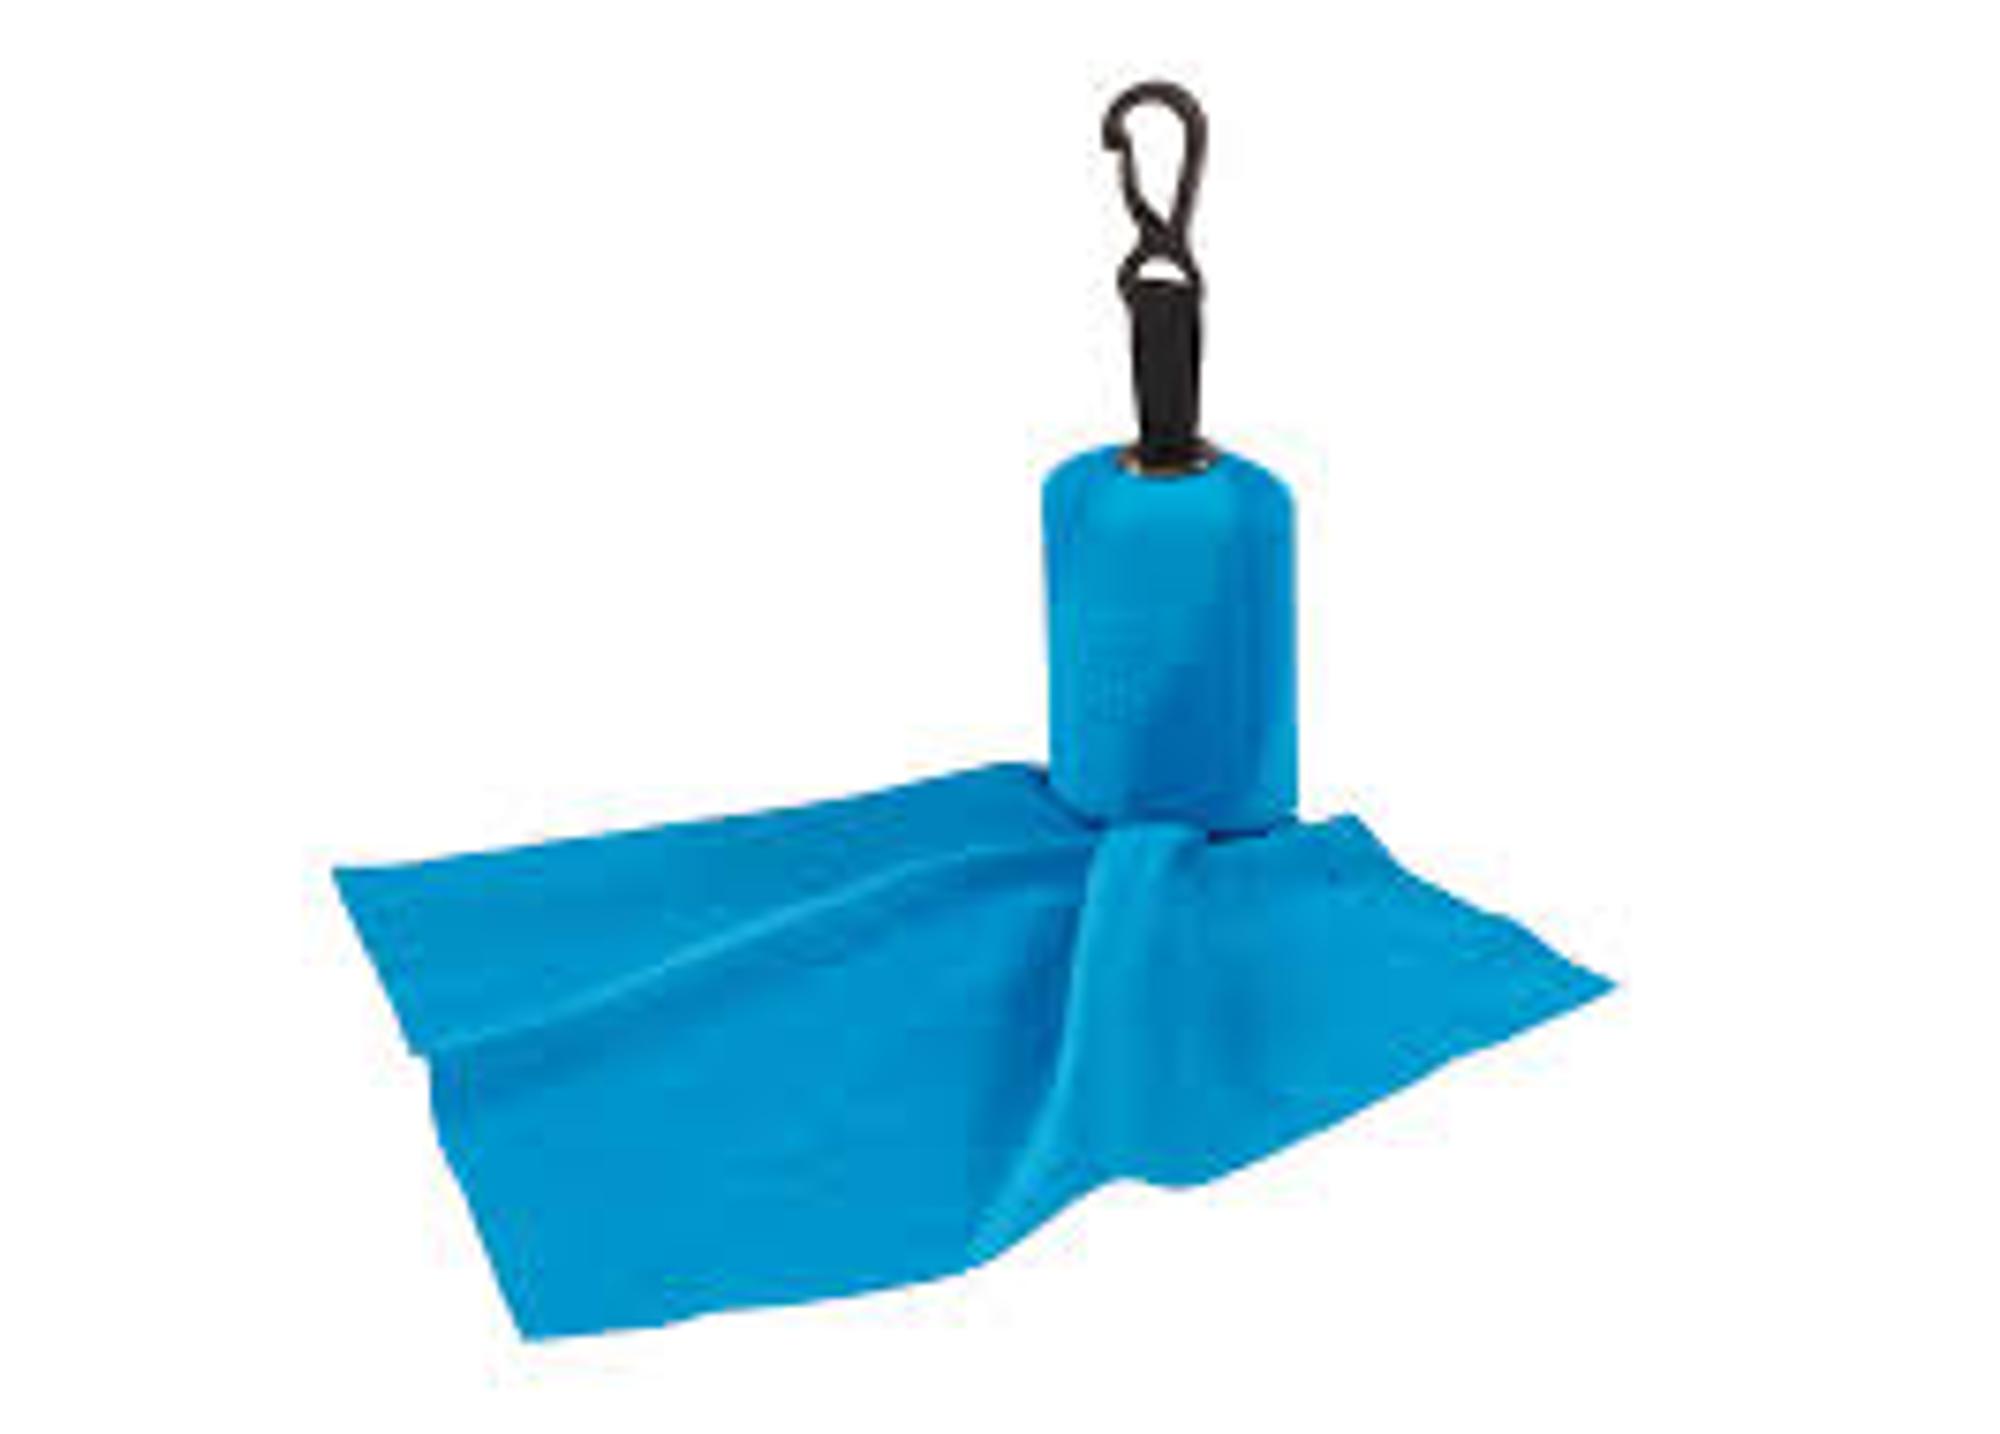 Hermit Microfiber Cleaning Cloth